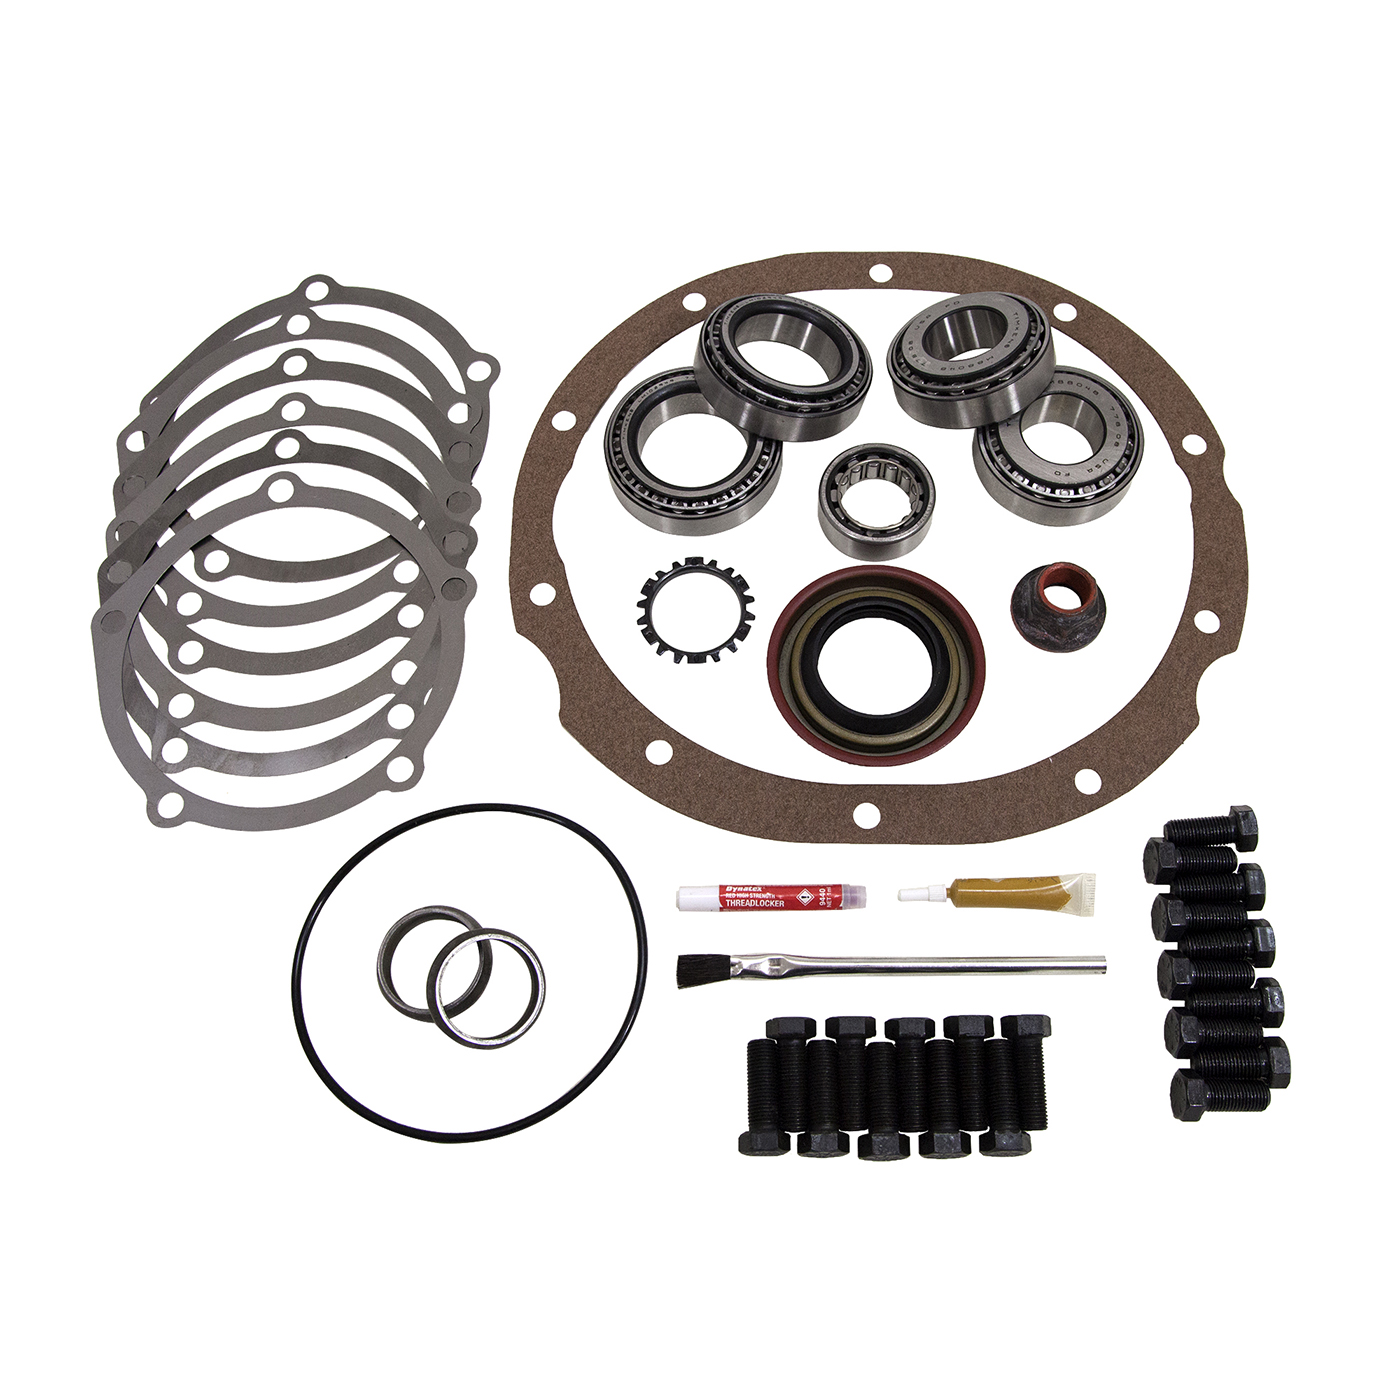 USA Standard Master Overhaul kit for the Ford 9" LM501310 differential